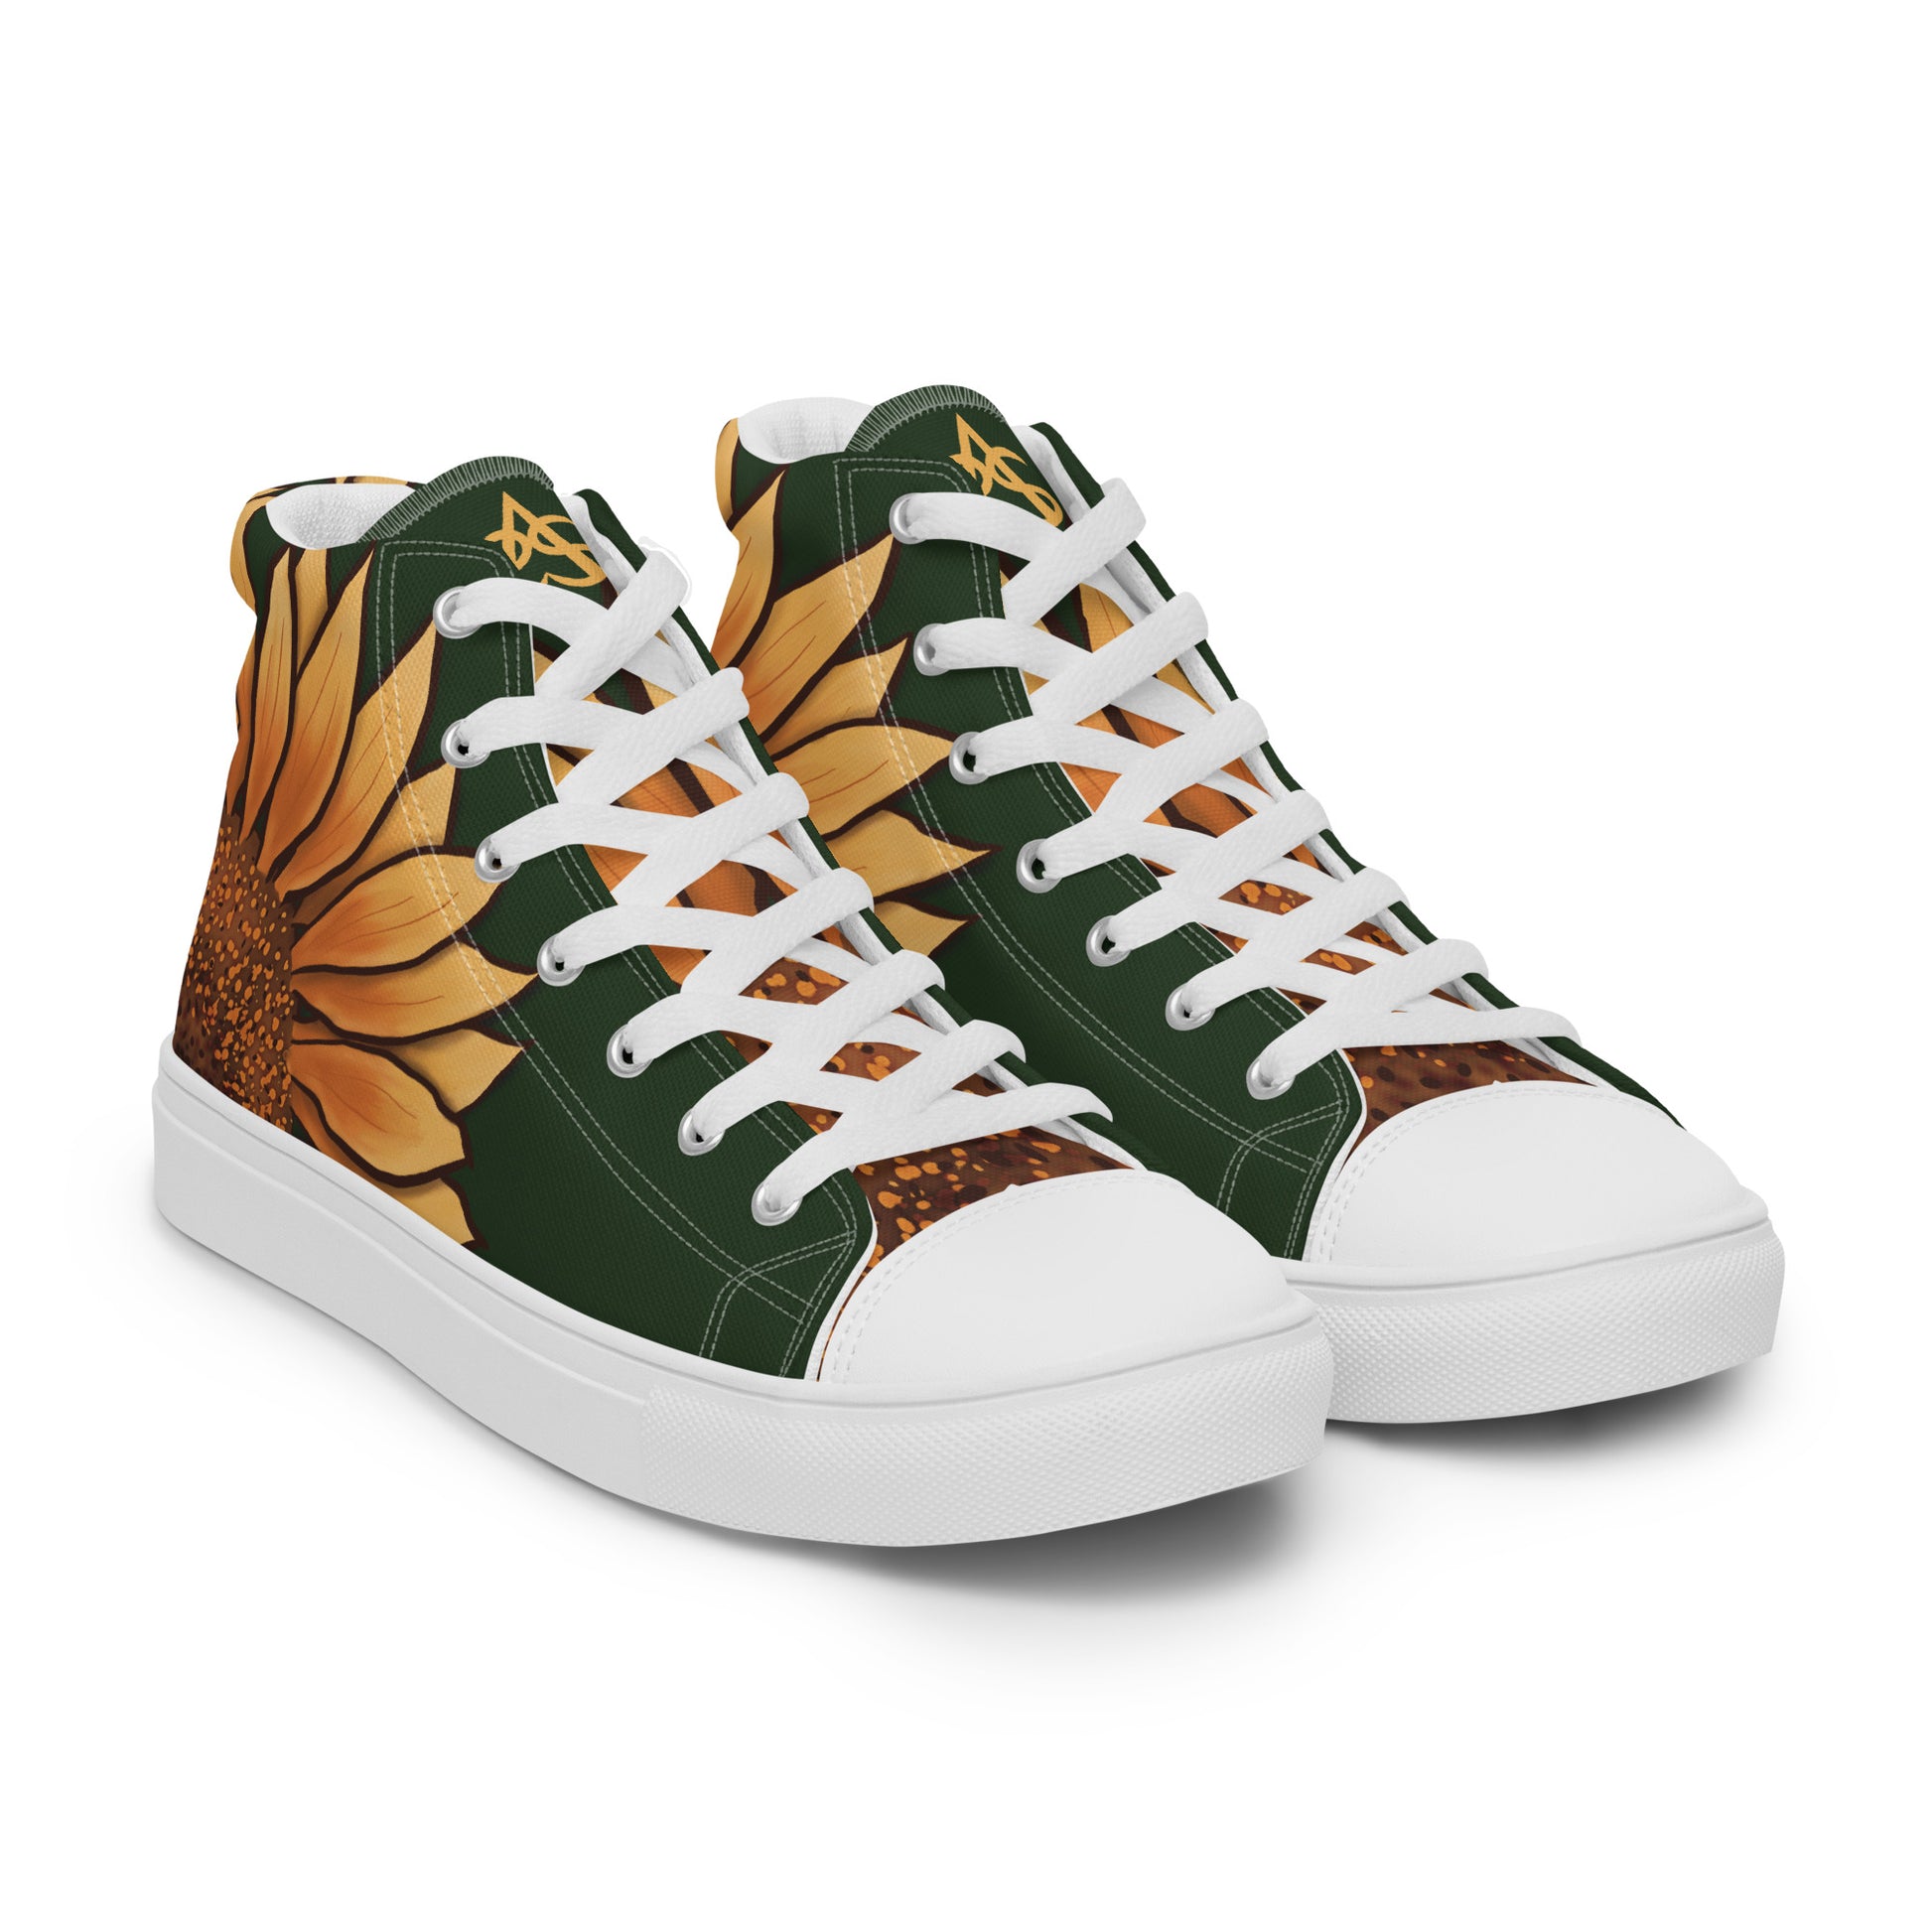 Right front view: a dark green high top shoe with a large sunflower painting on the side, the middle starting around the heel and the petals wrapping around the side of the shoe, almost to the laces.